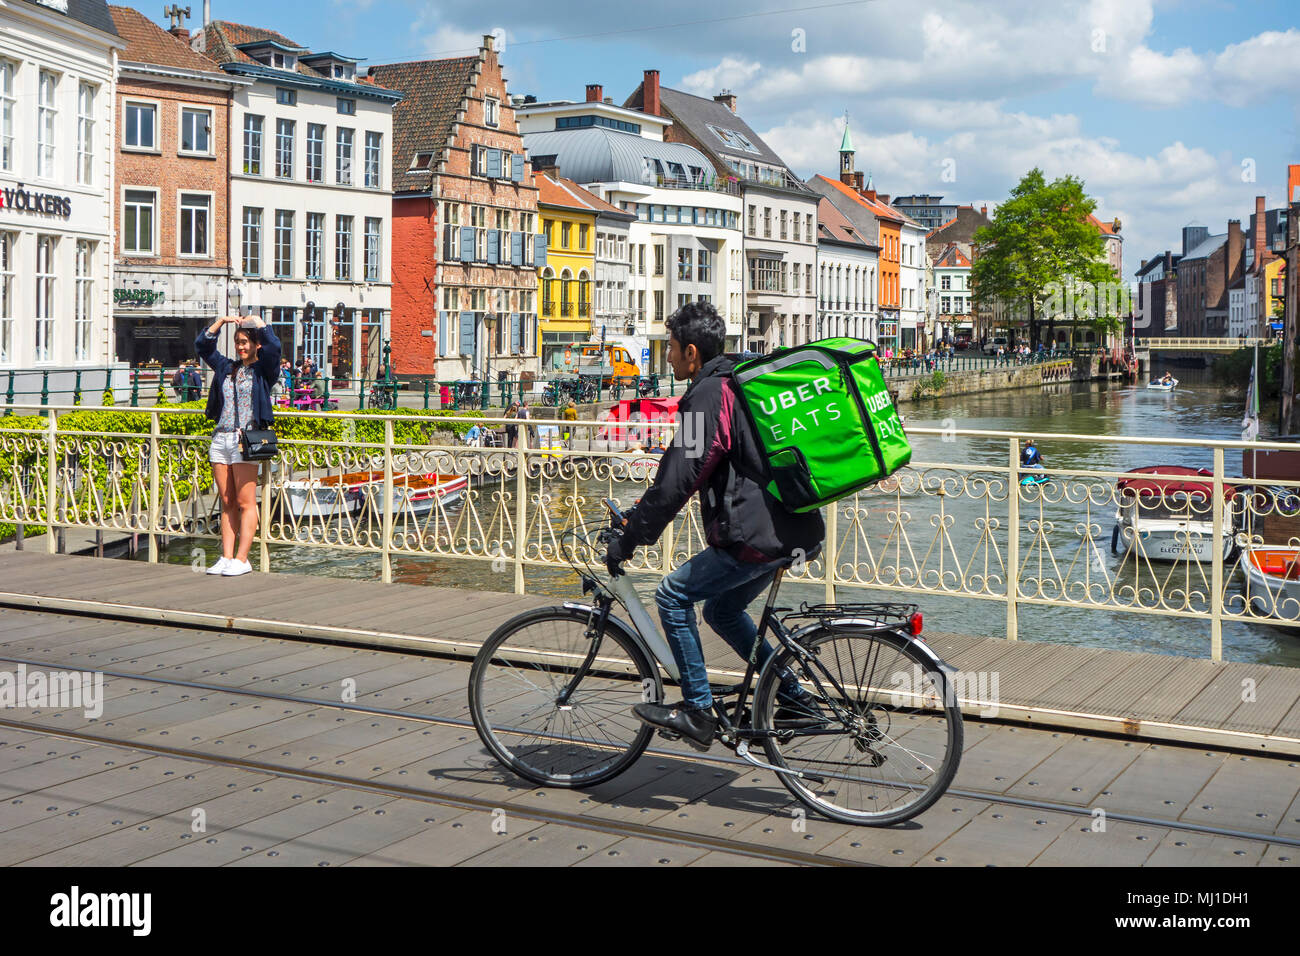 UberEATS / Uber Eats online meal ordering and delivery platform, bicycle courier delivering meals in the city center of Ghent, Belgium Stock Photo